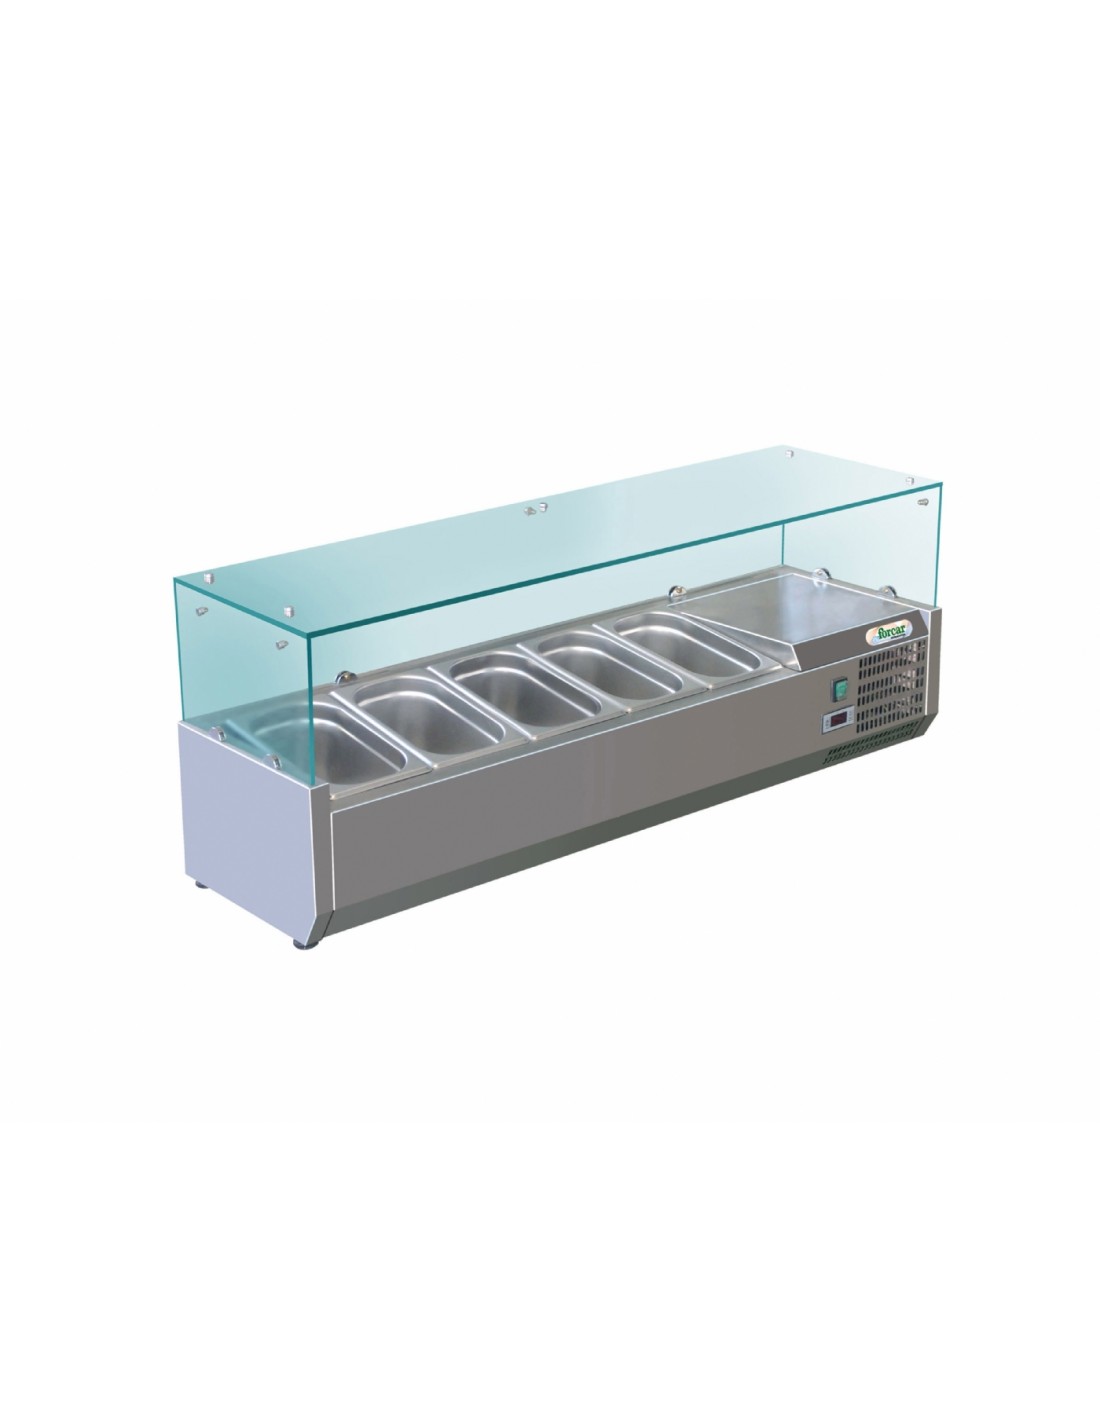 Refrigerated display case brings ingredients - Static - Capacity 5 GN 1/3 + 1 GN 1/2 -cm 150 x 38 x 44.5h